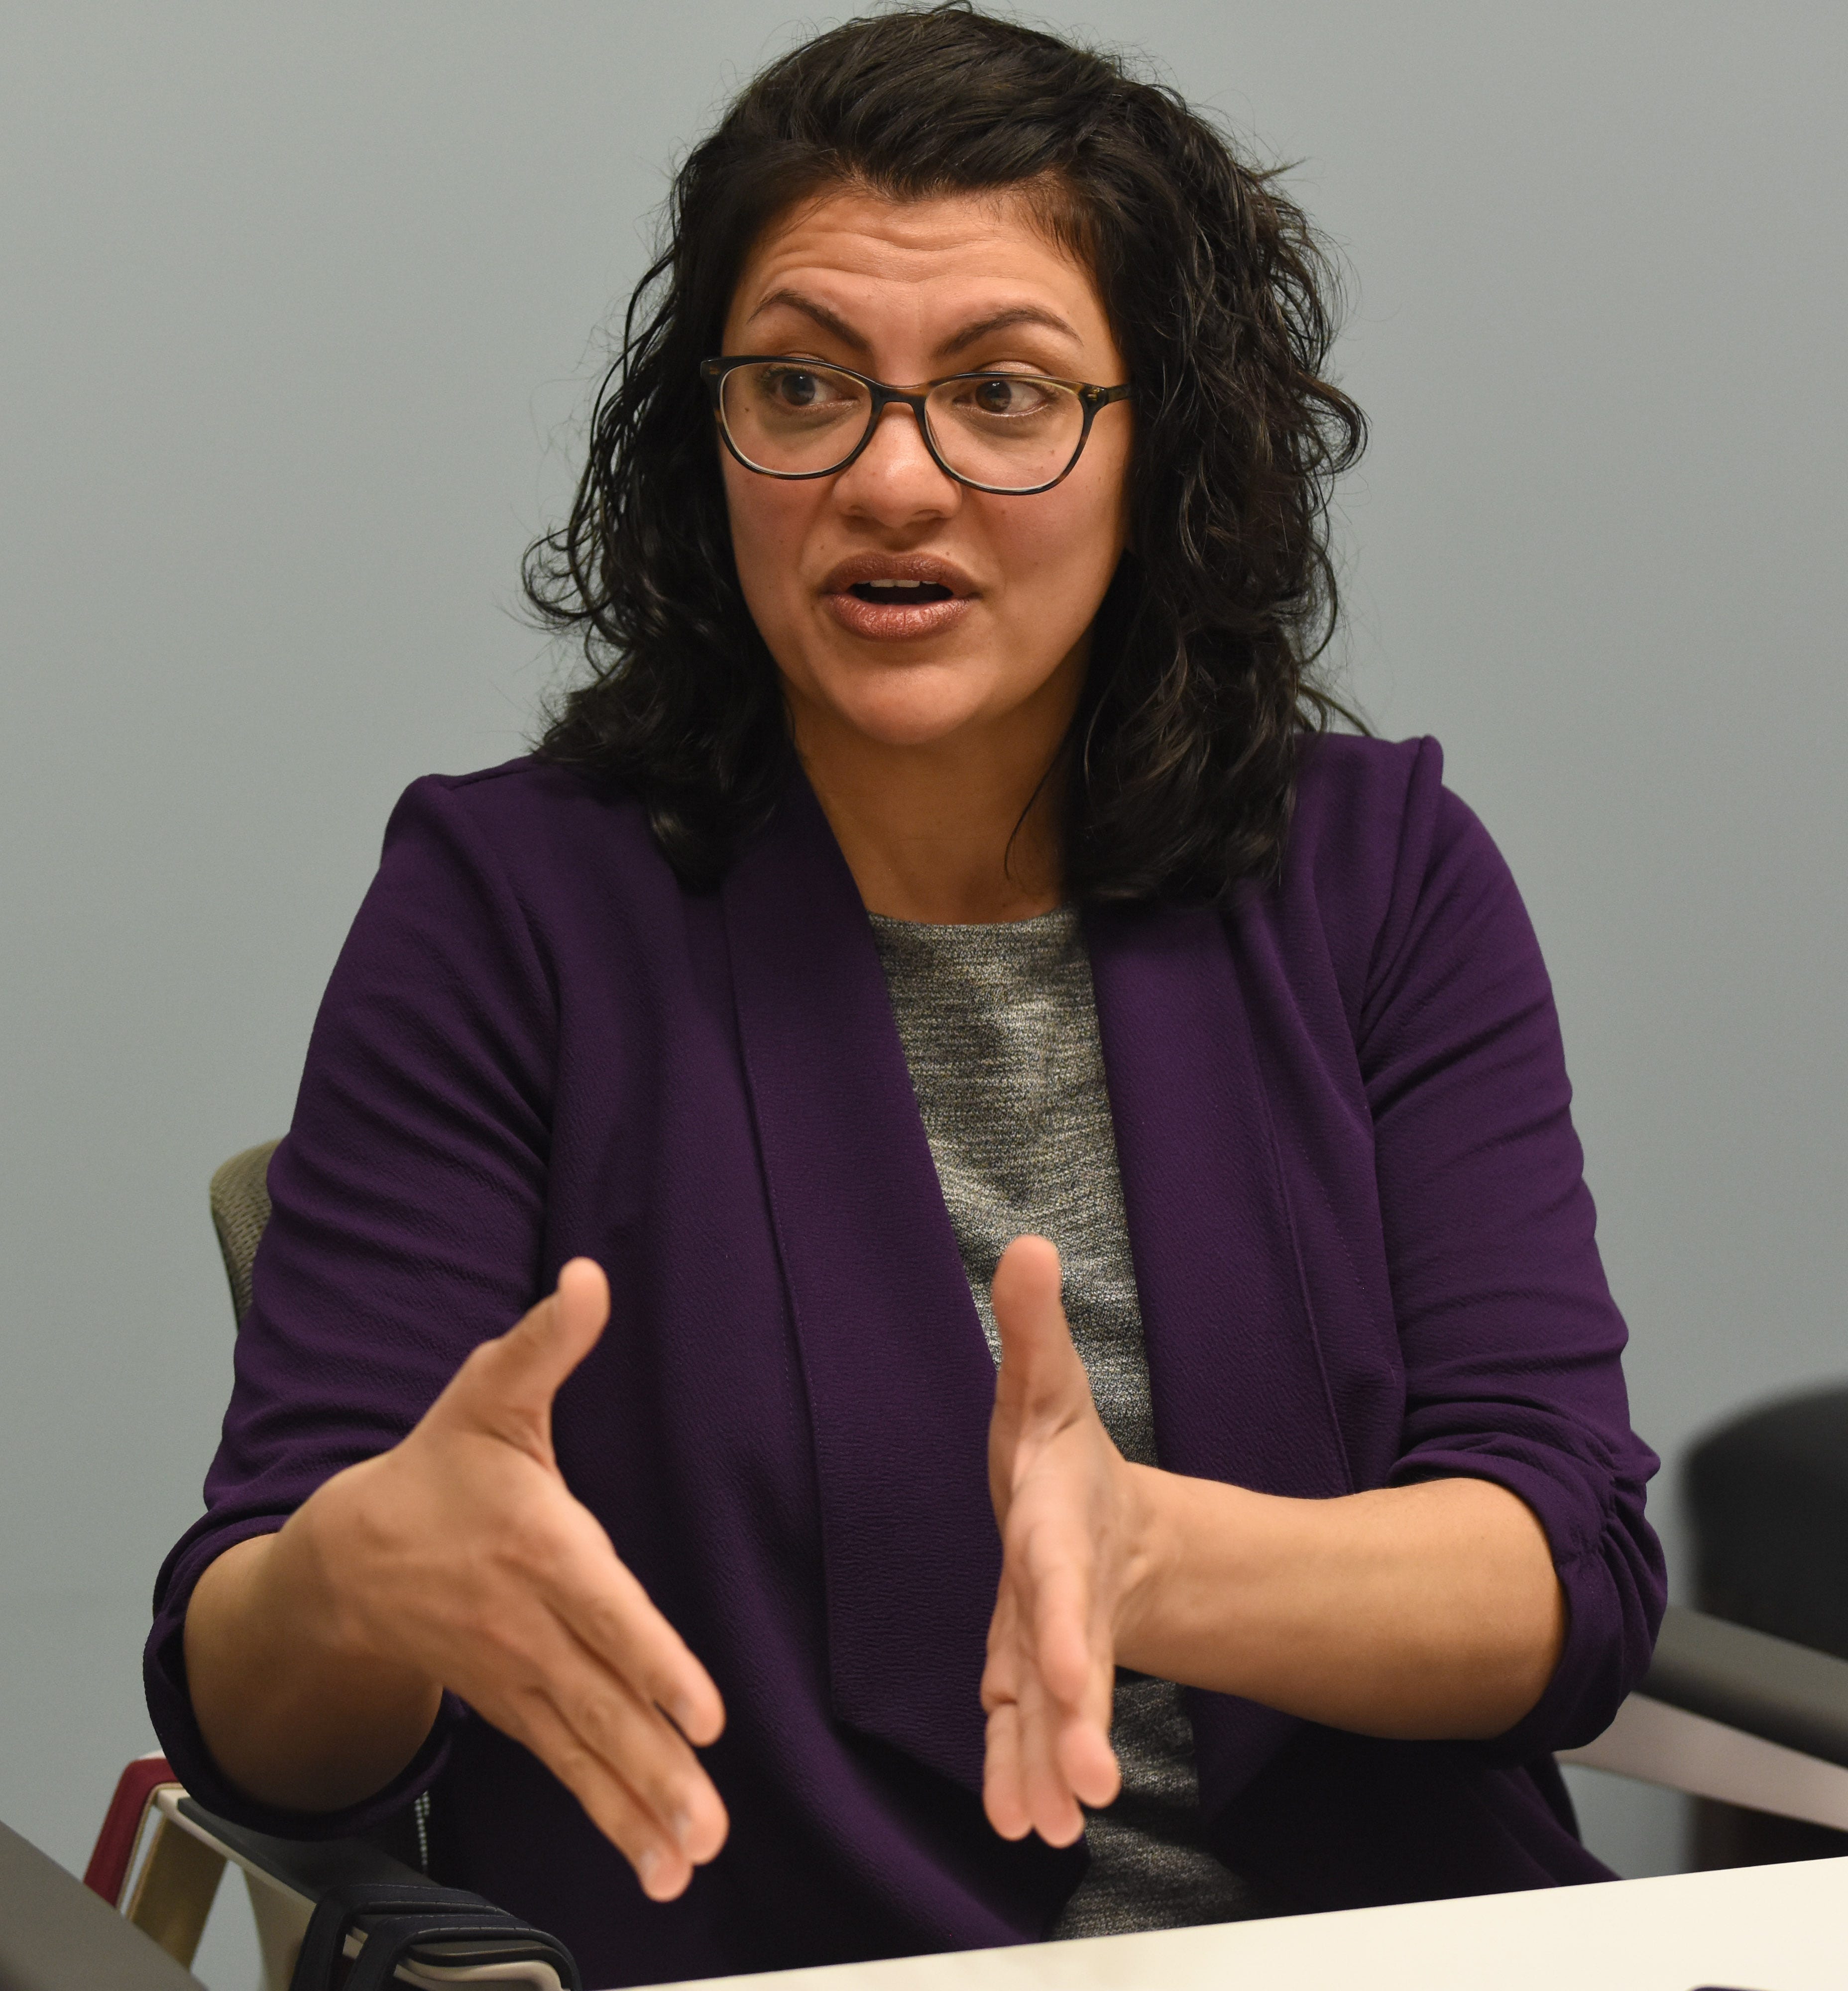 U.S. Congresswoman Rashida Tlaib speaks about her first few months in office while meeting with The Detroit News Editorial Board in Detroit on Wednesday, March 20, 2019.